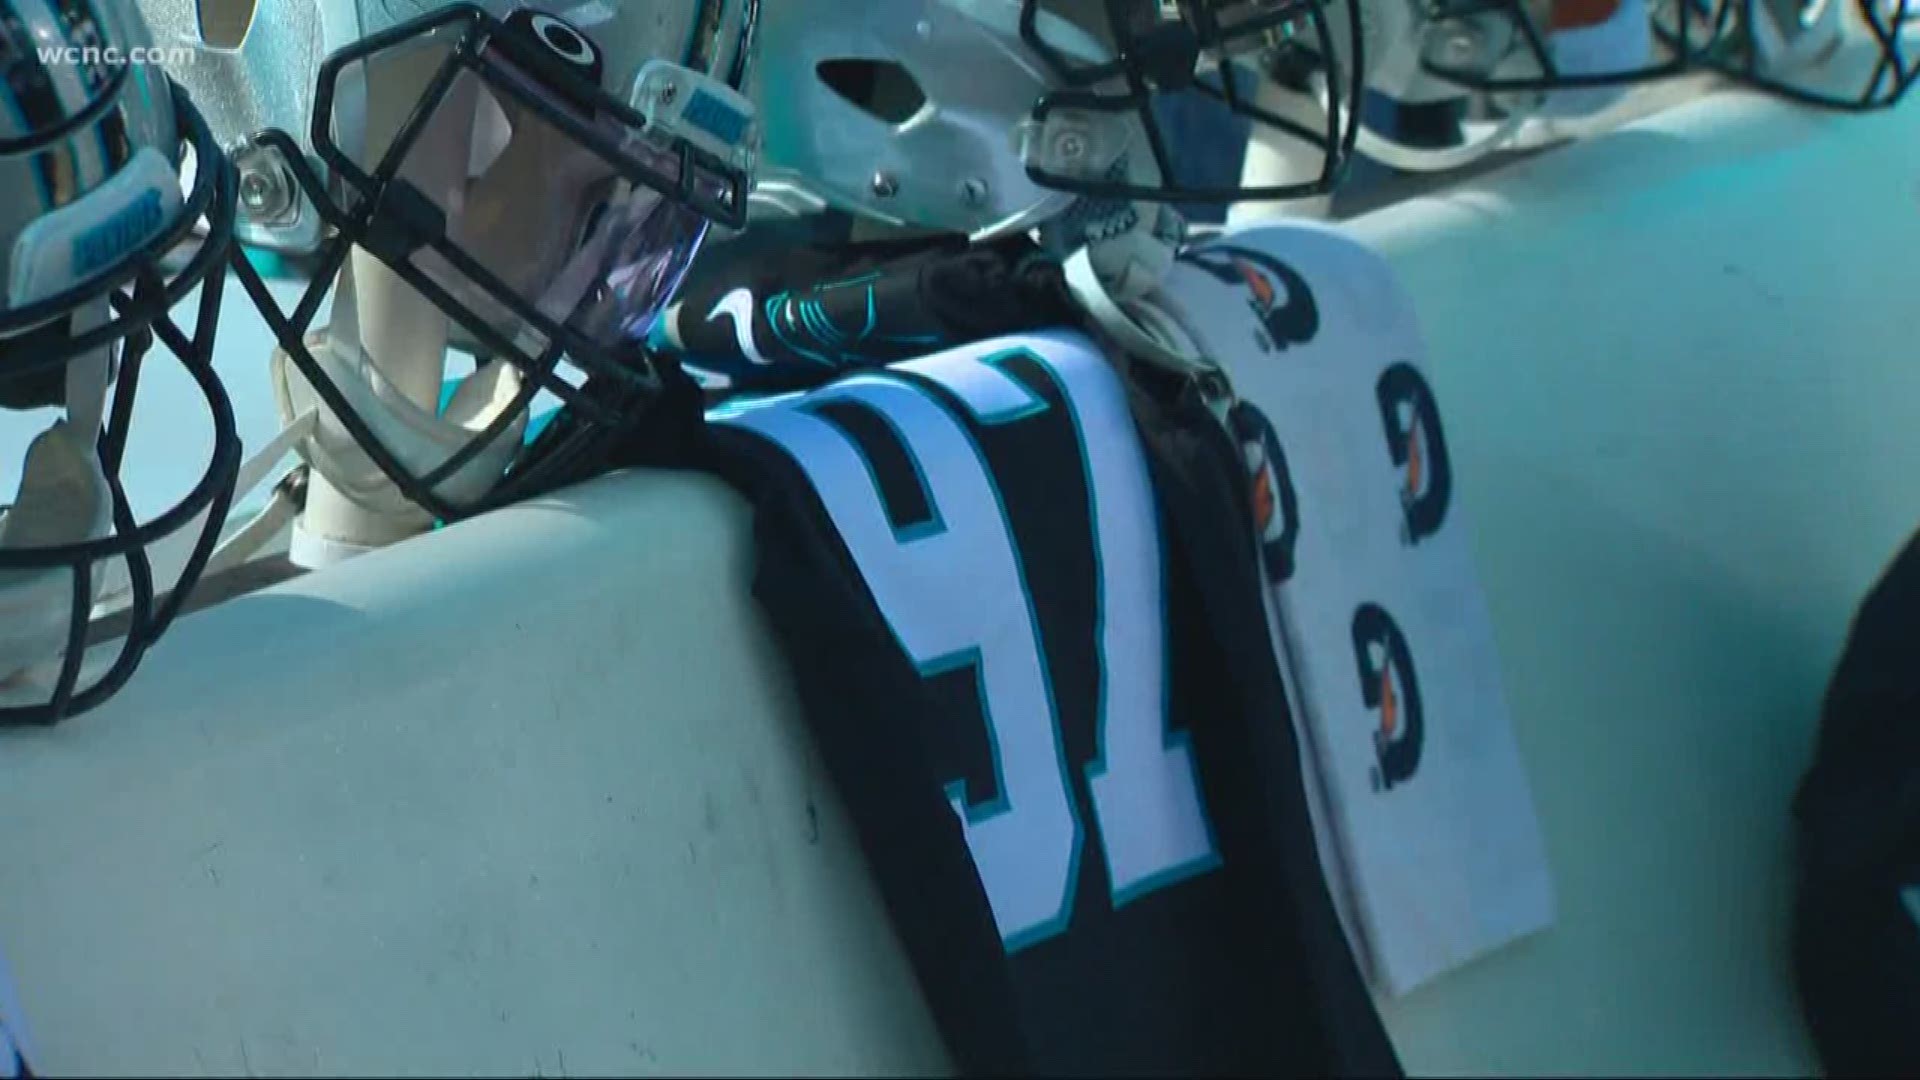 The Carolina Panther dedicated Sunday's win to Addison, who was away from the team after his brother's shooting death in Alabama.